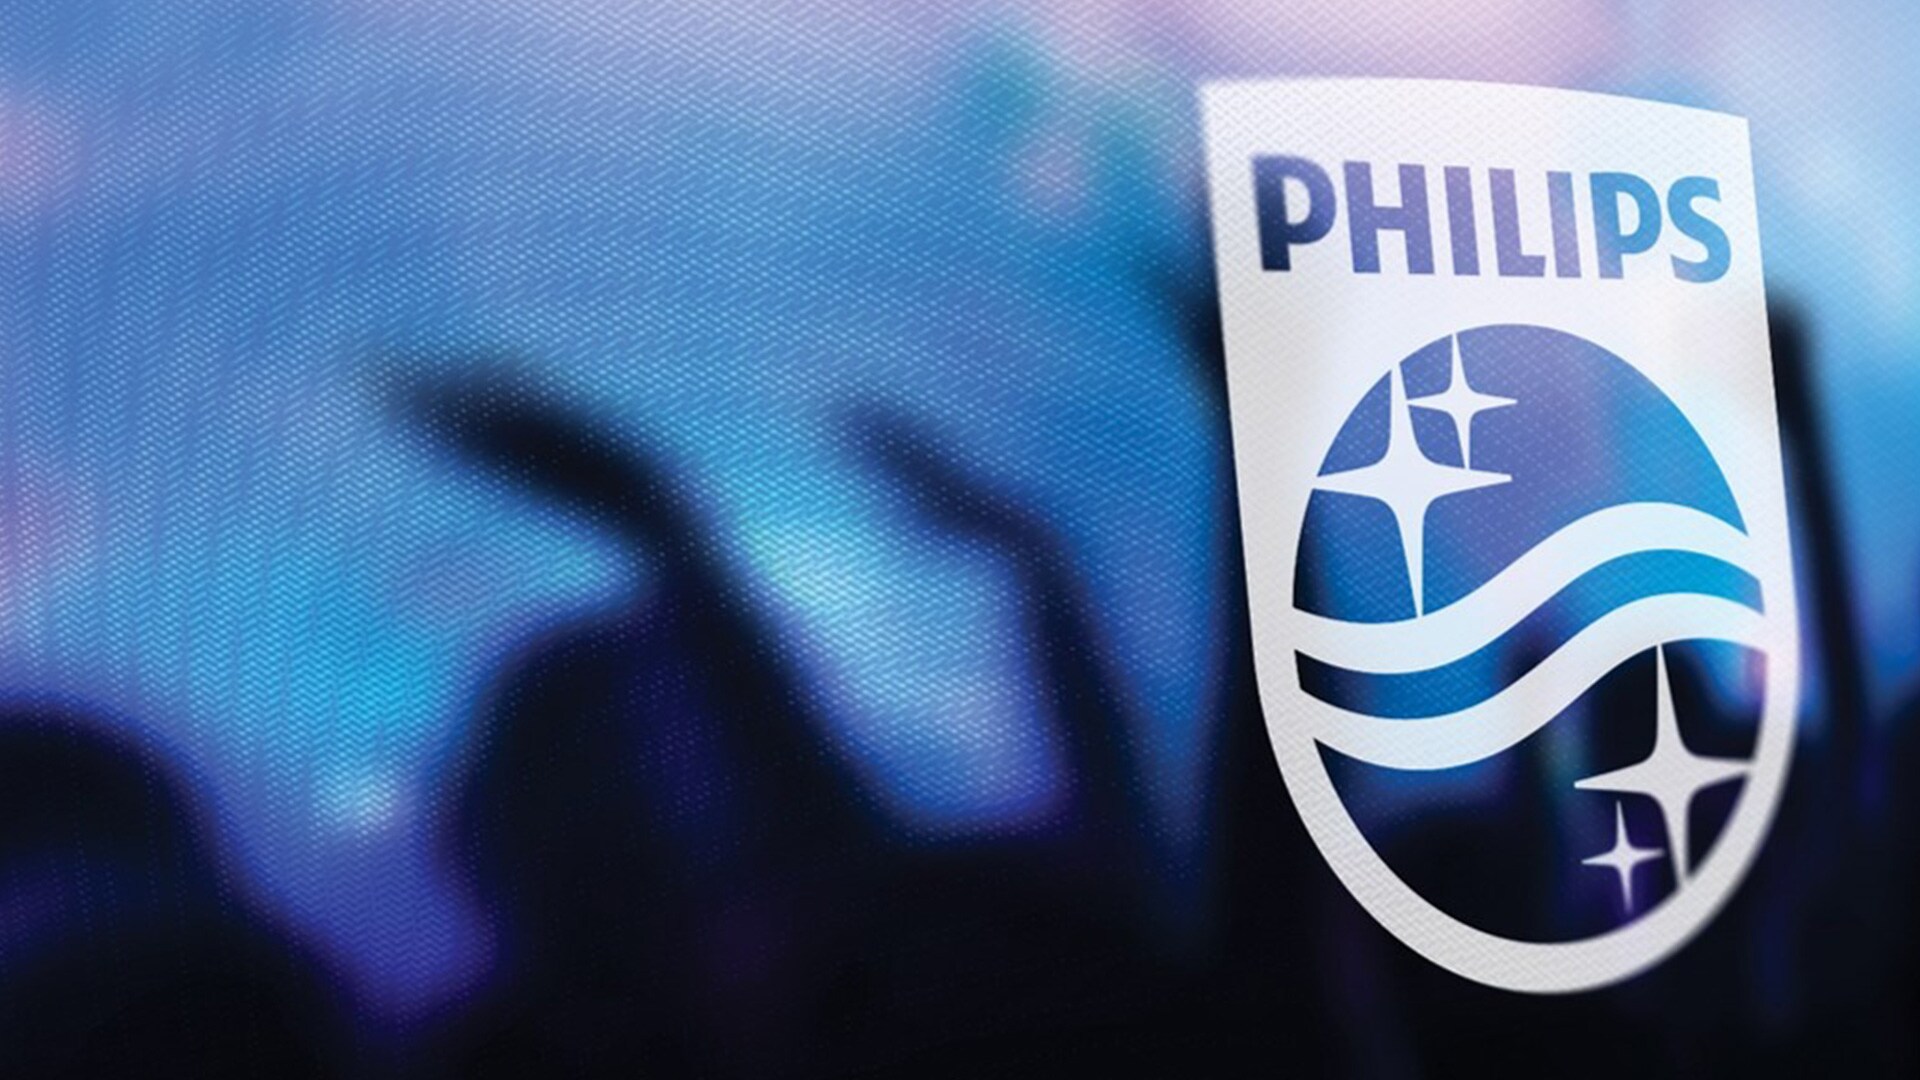 Philips and Amref signed an MOU 